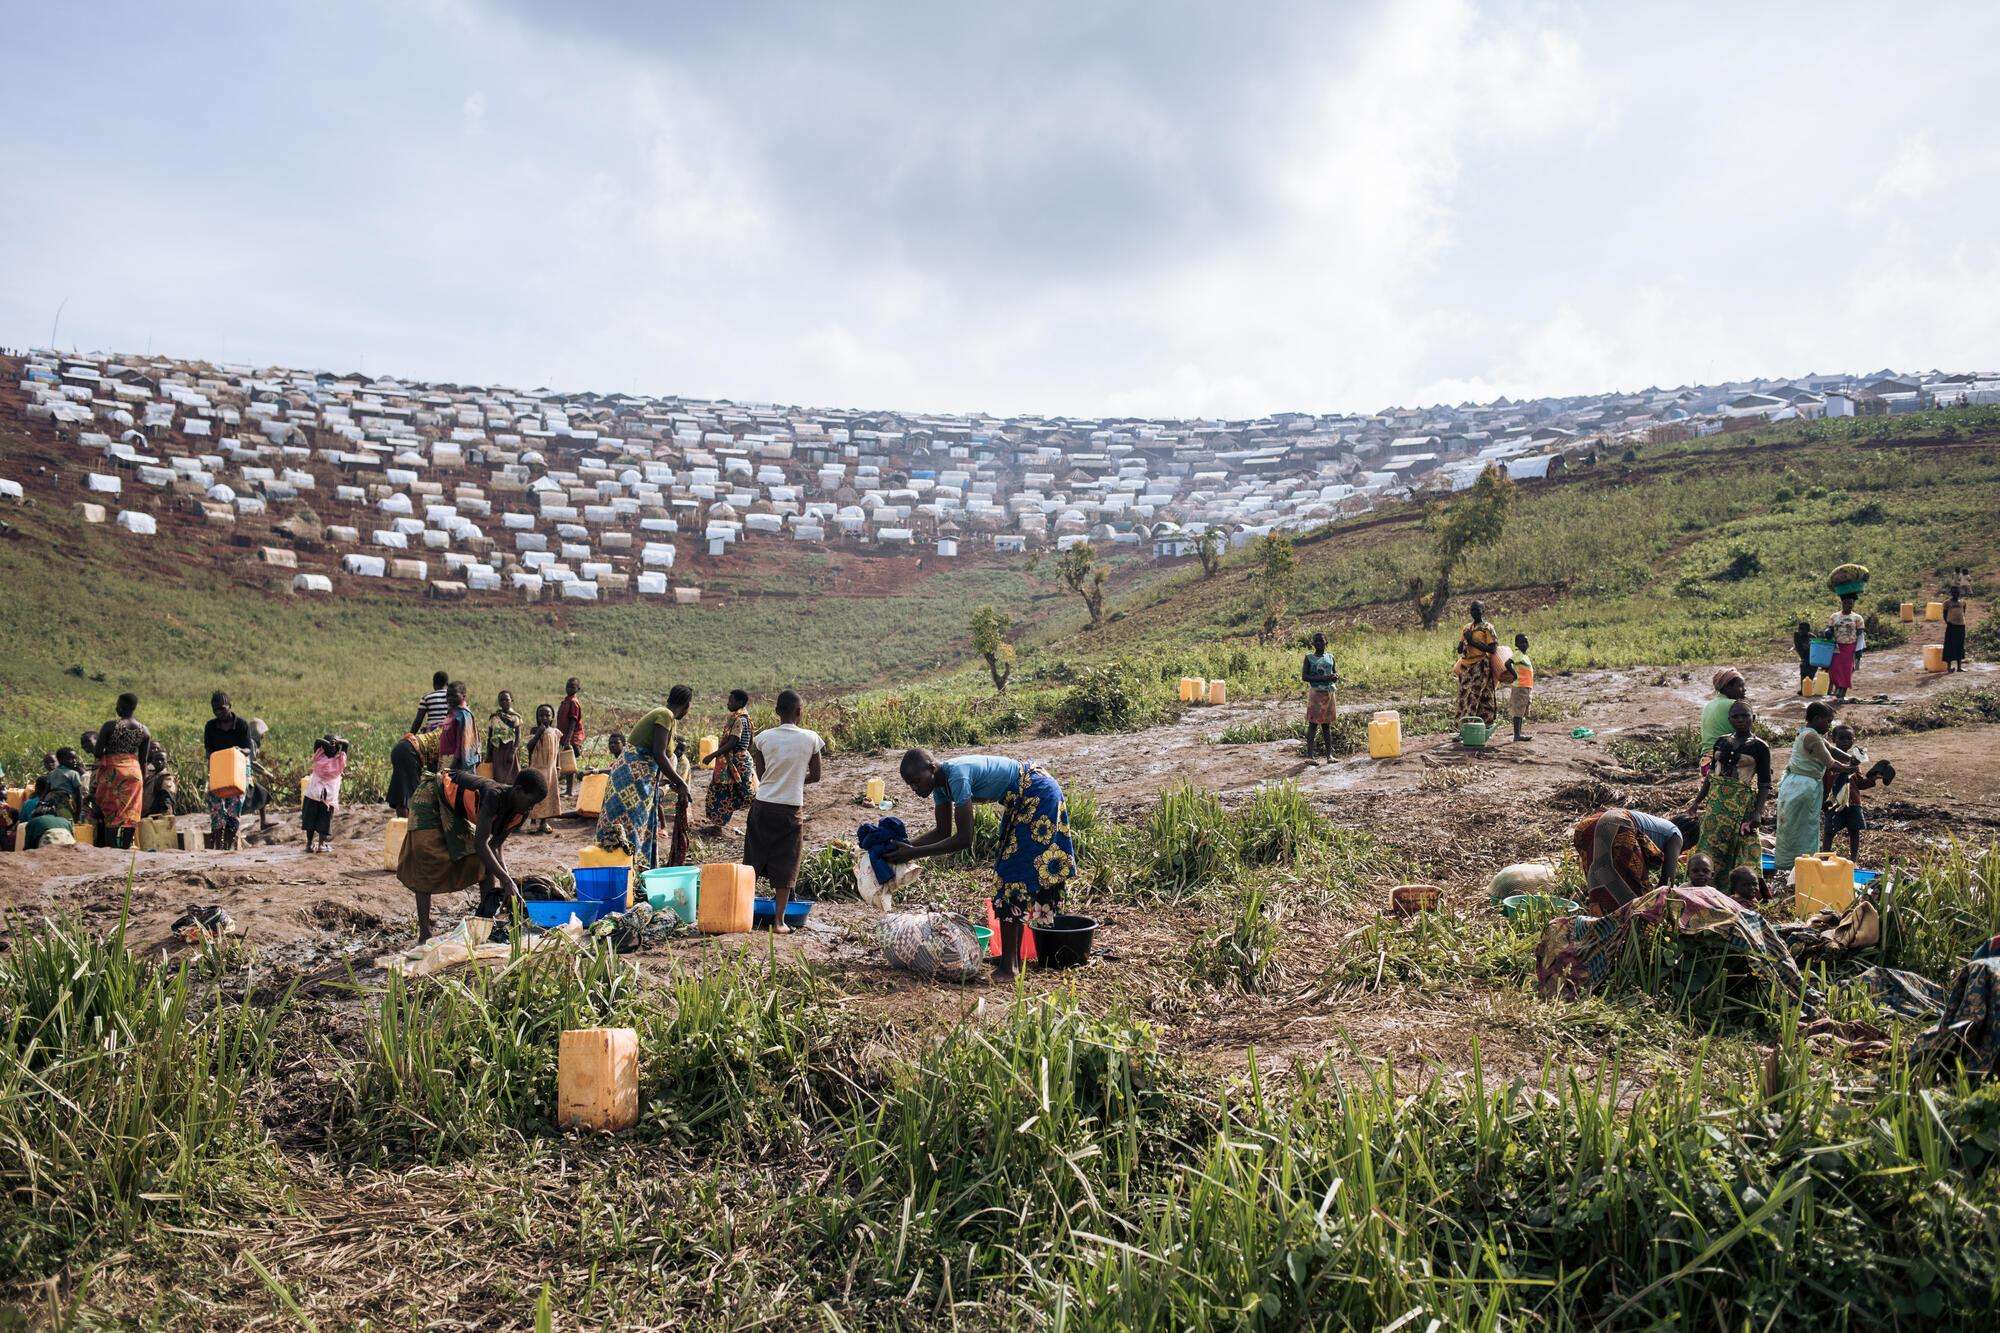 Living conditions in Rhoe Camp, DR Congo